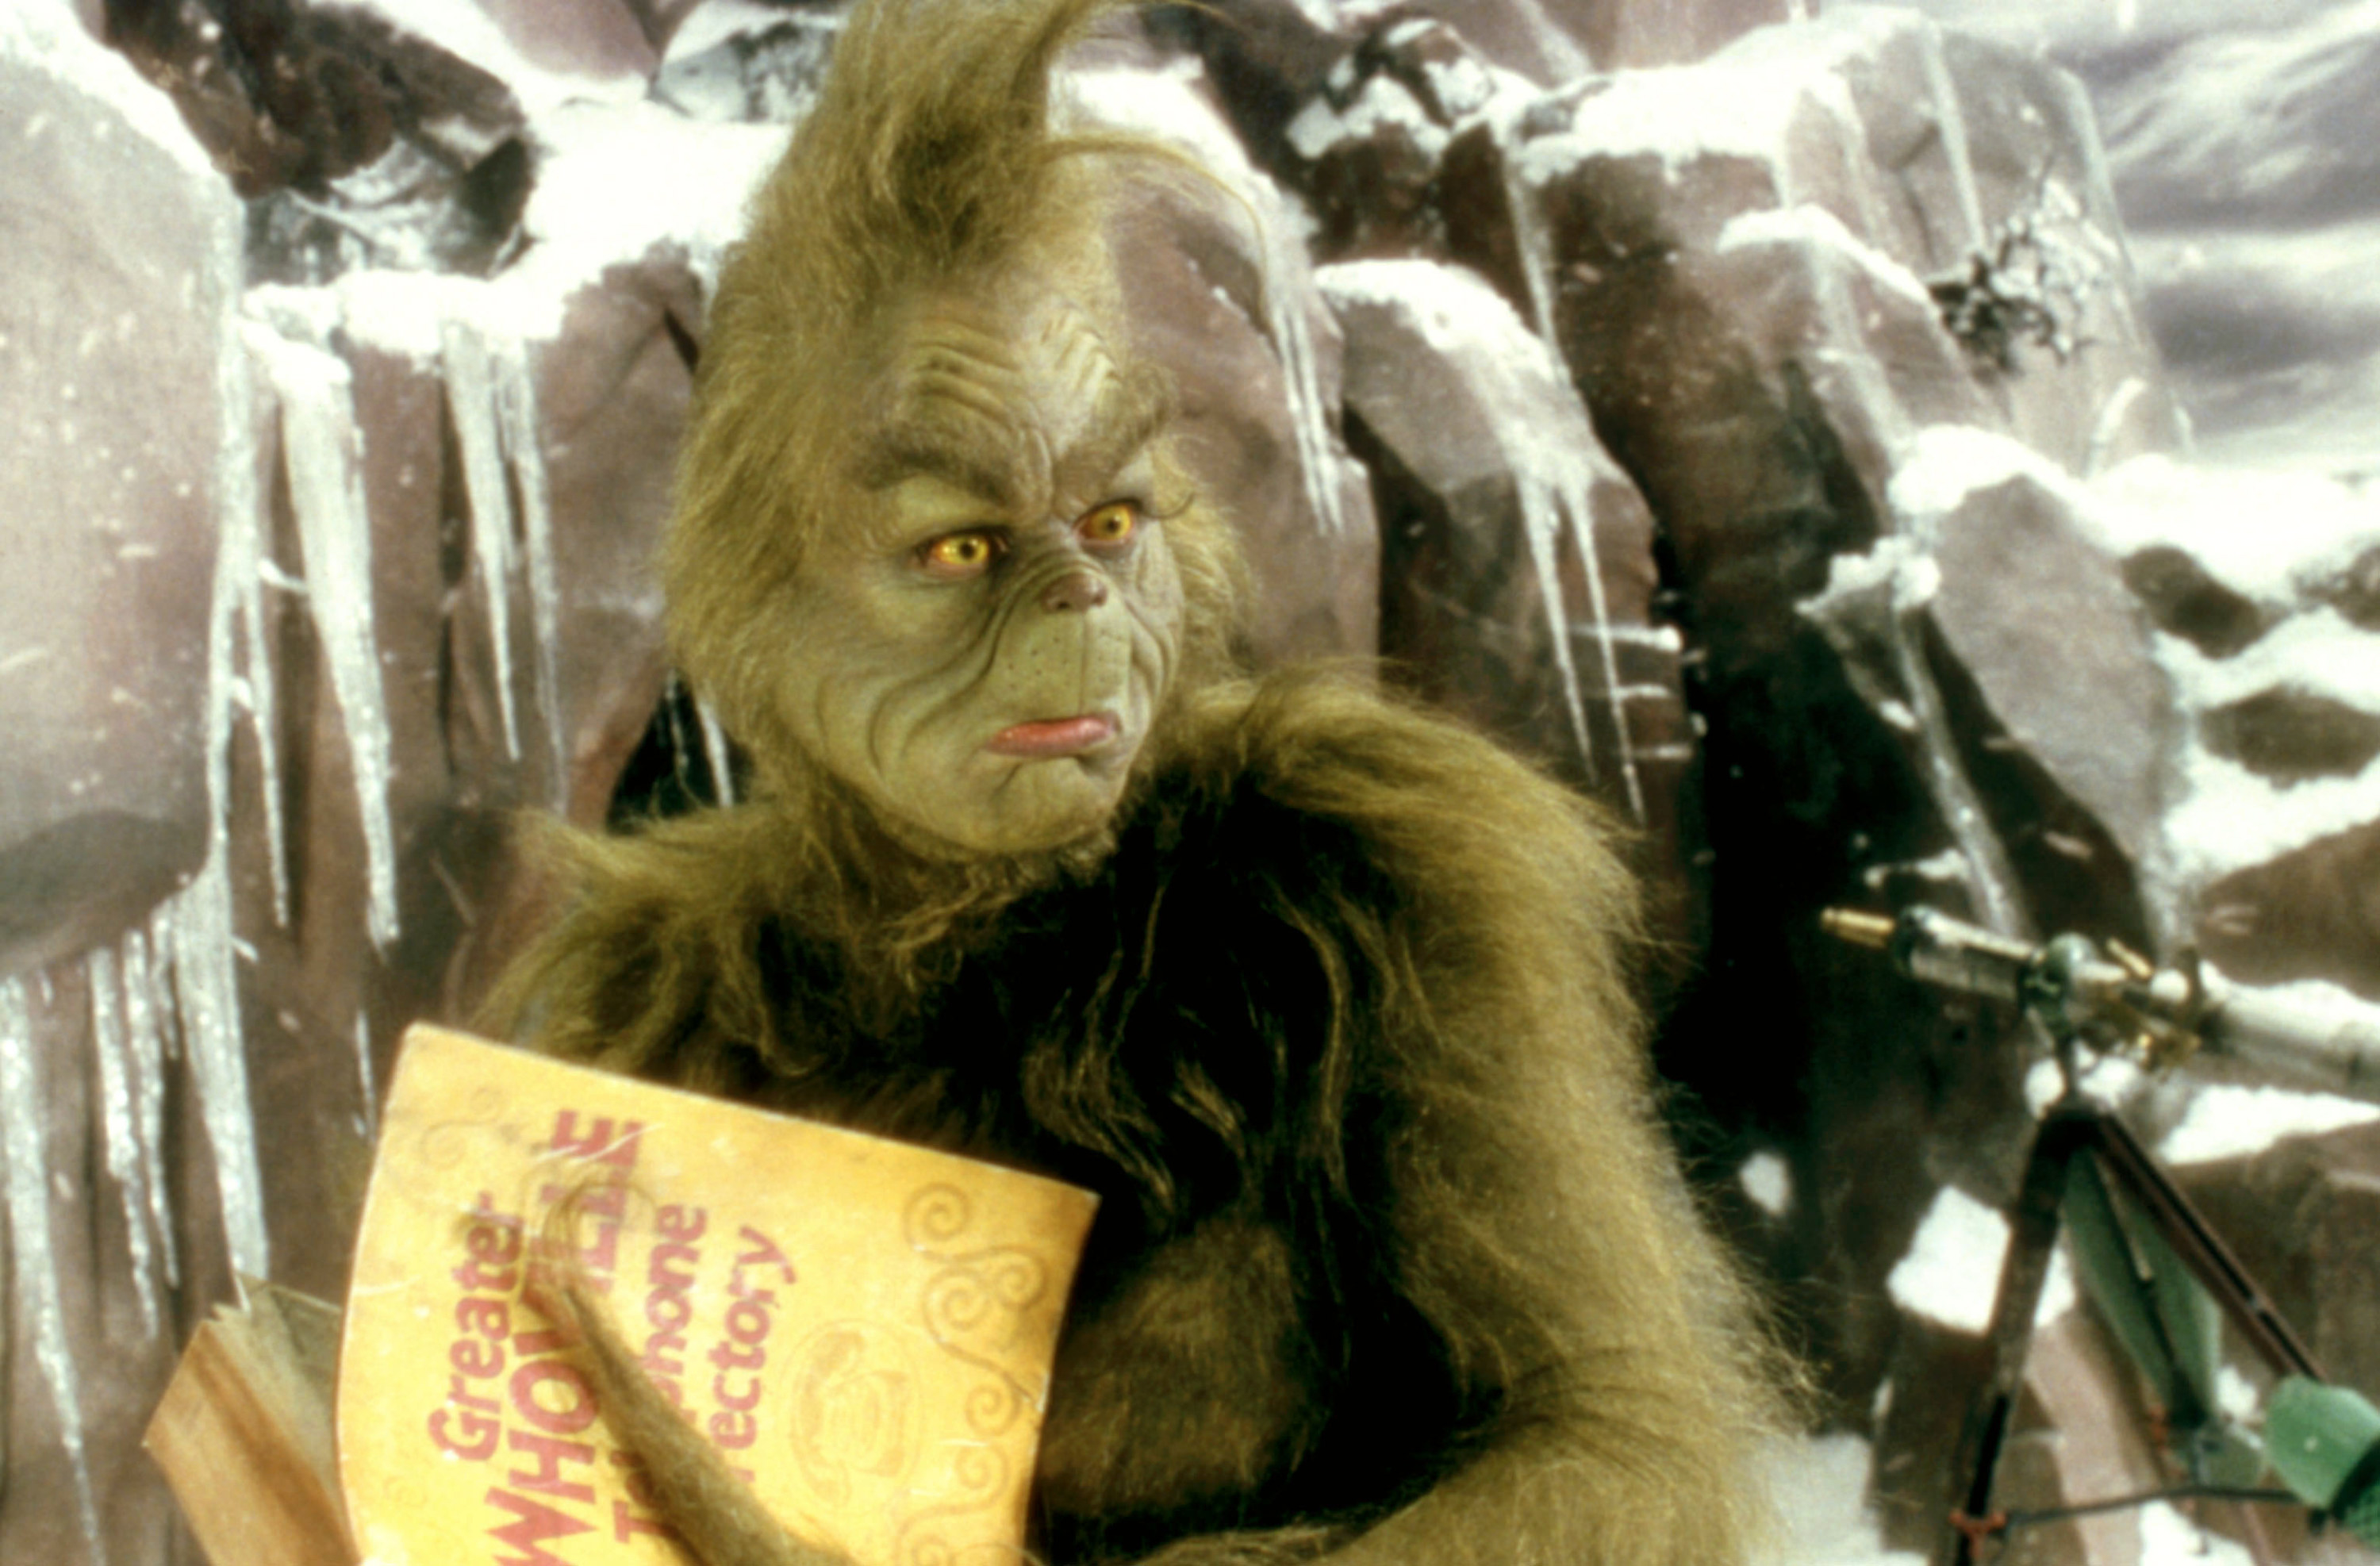 the Grinch reading a book in his cave